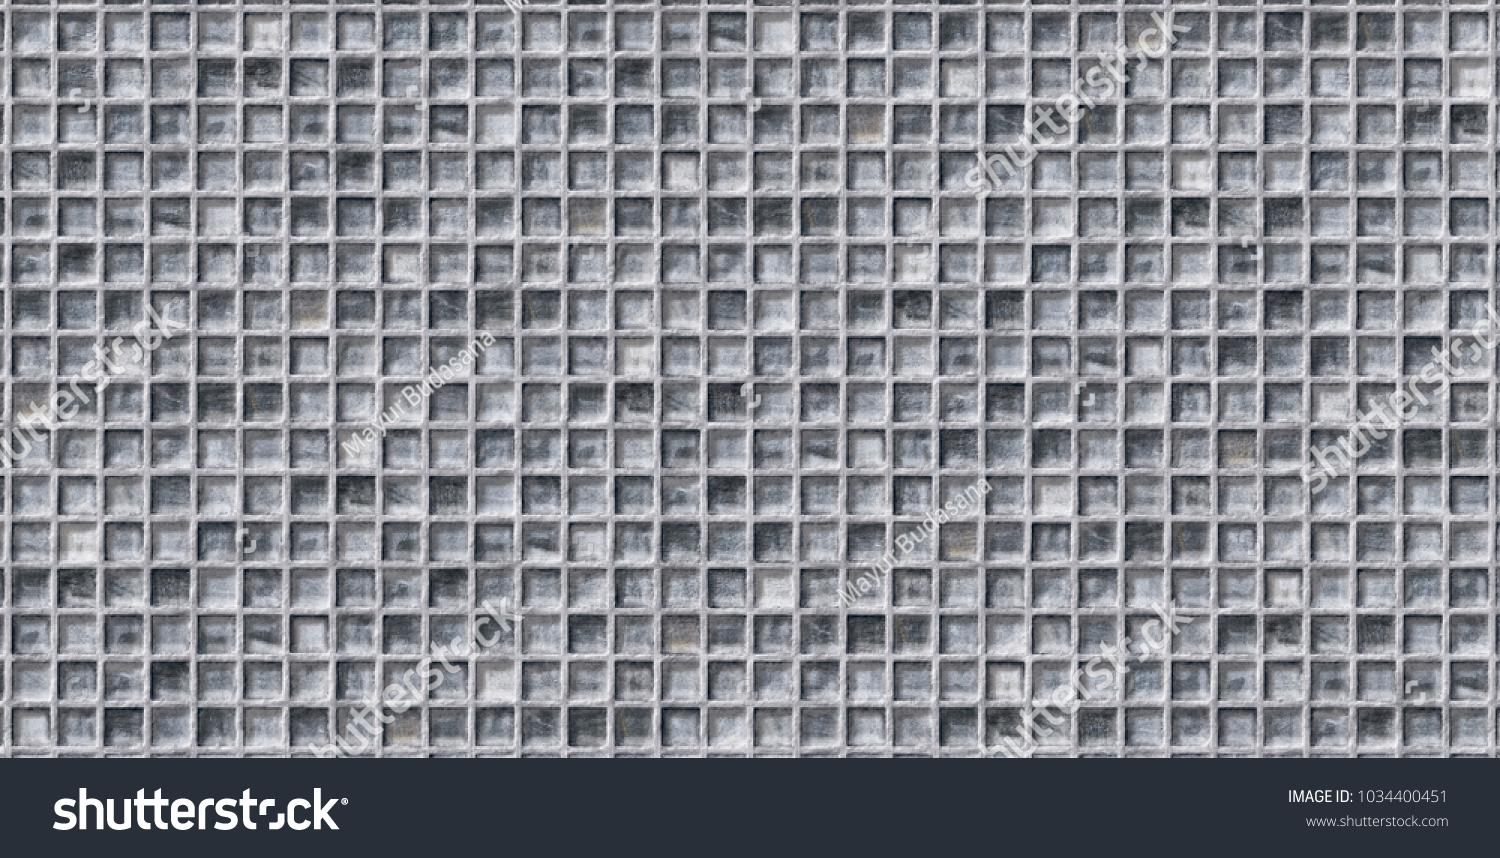 Grey mosaic wall texture and background #1034400451